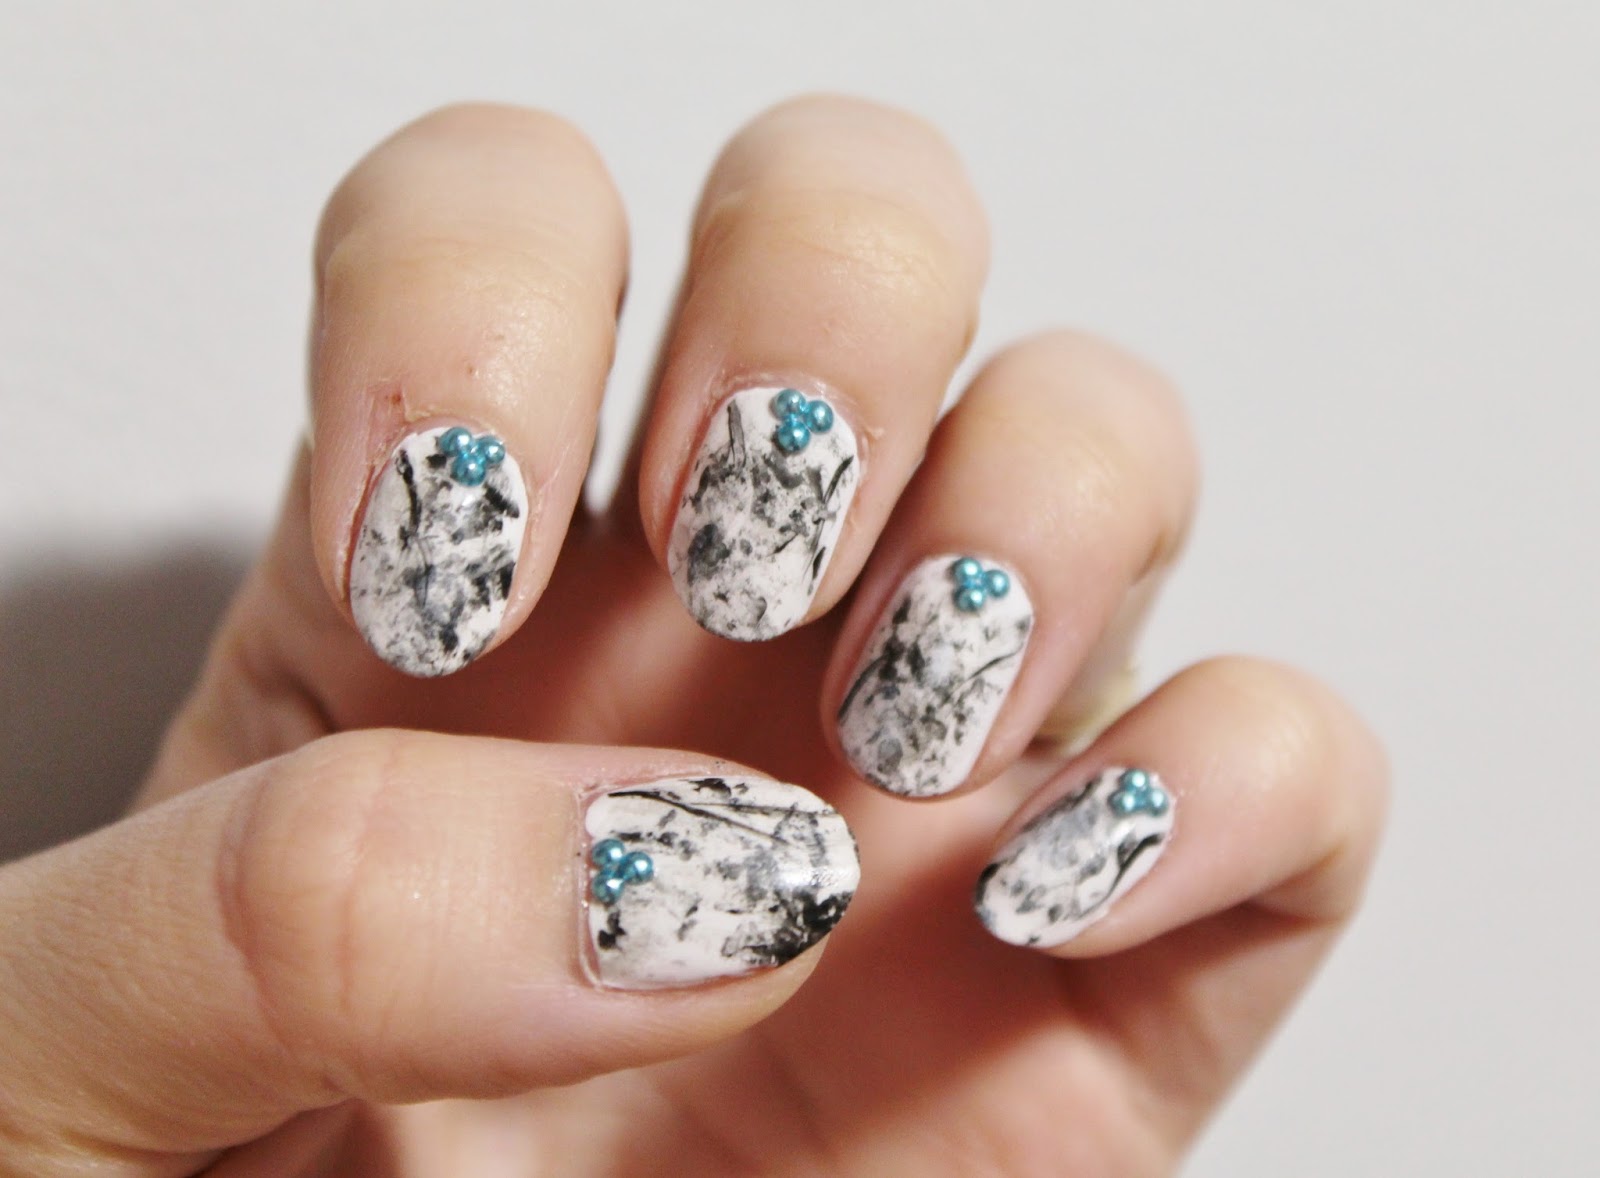 9. 5 Tips for Perfecting Your Marble Nail Design - wide 6